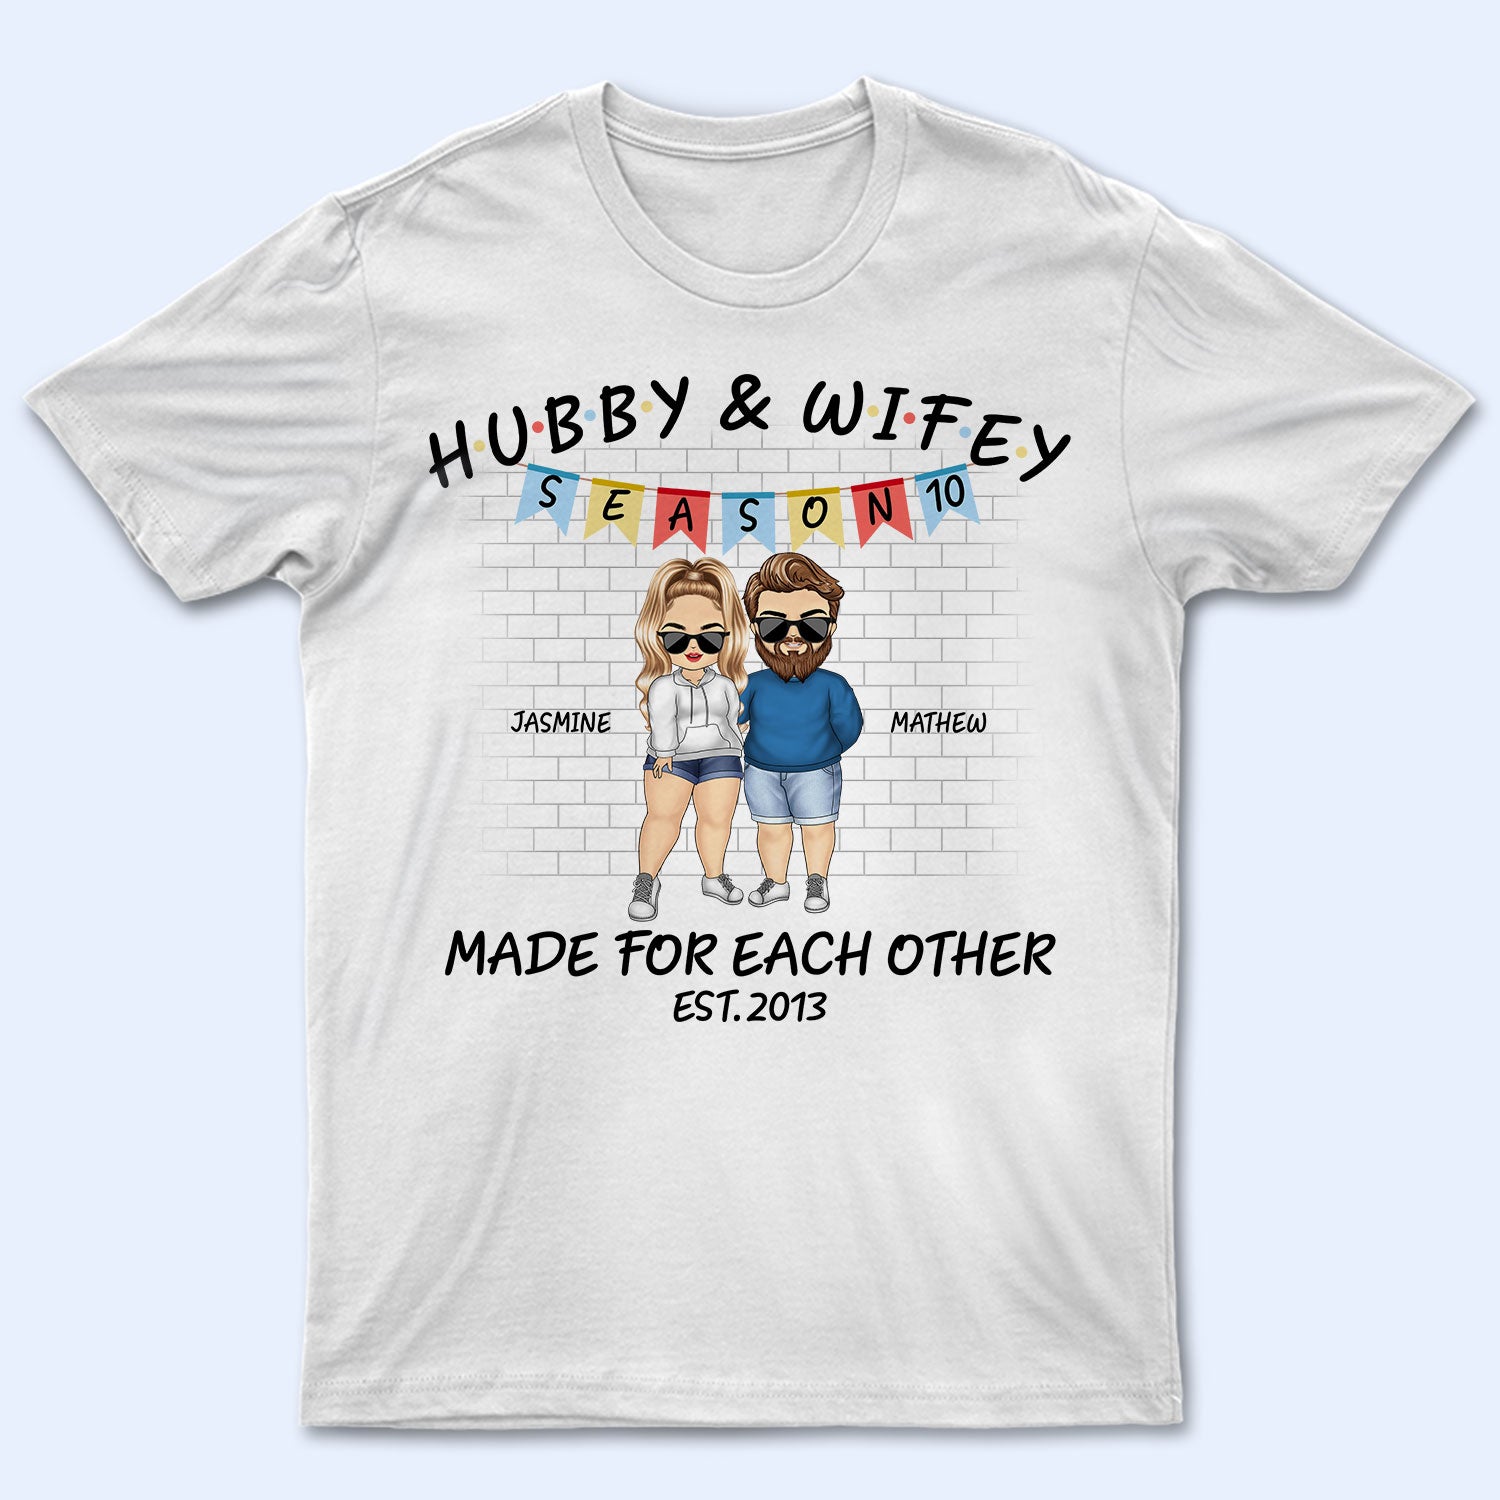 Season Hubby & Wifey - Gift For Couples - Personalized T Shirt